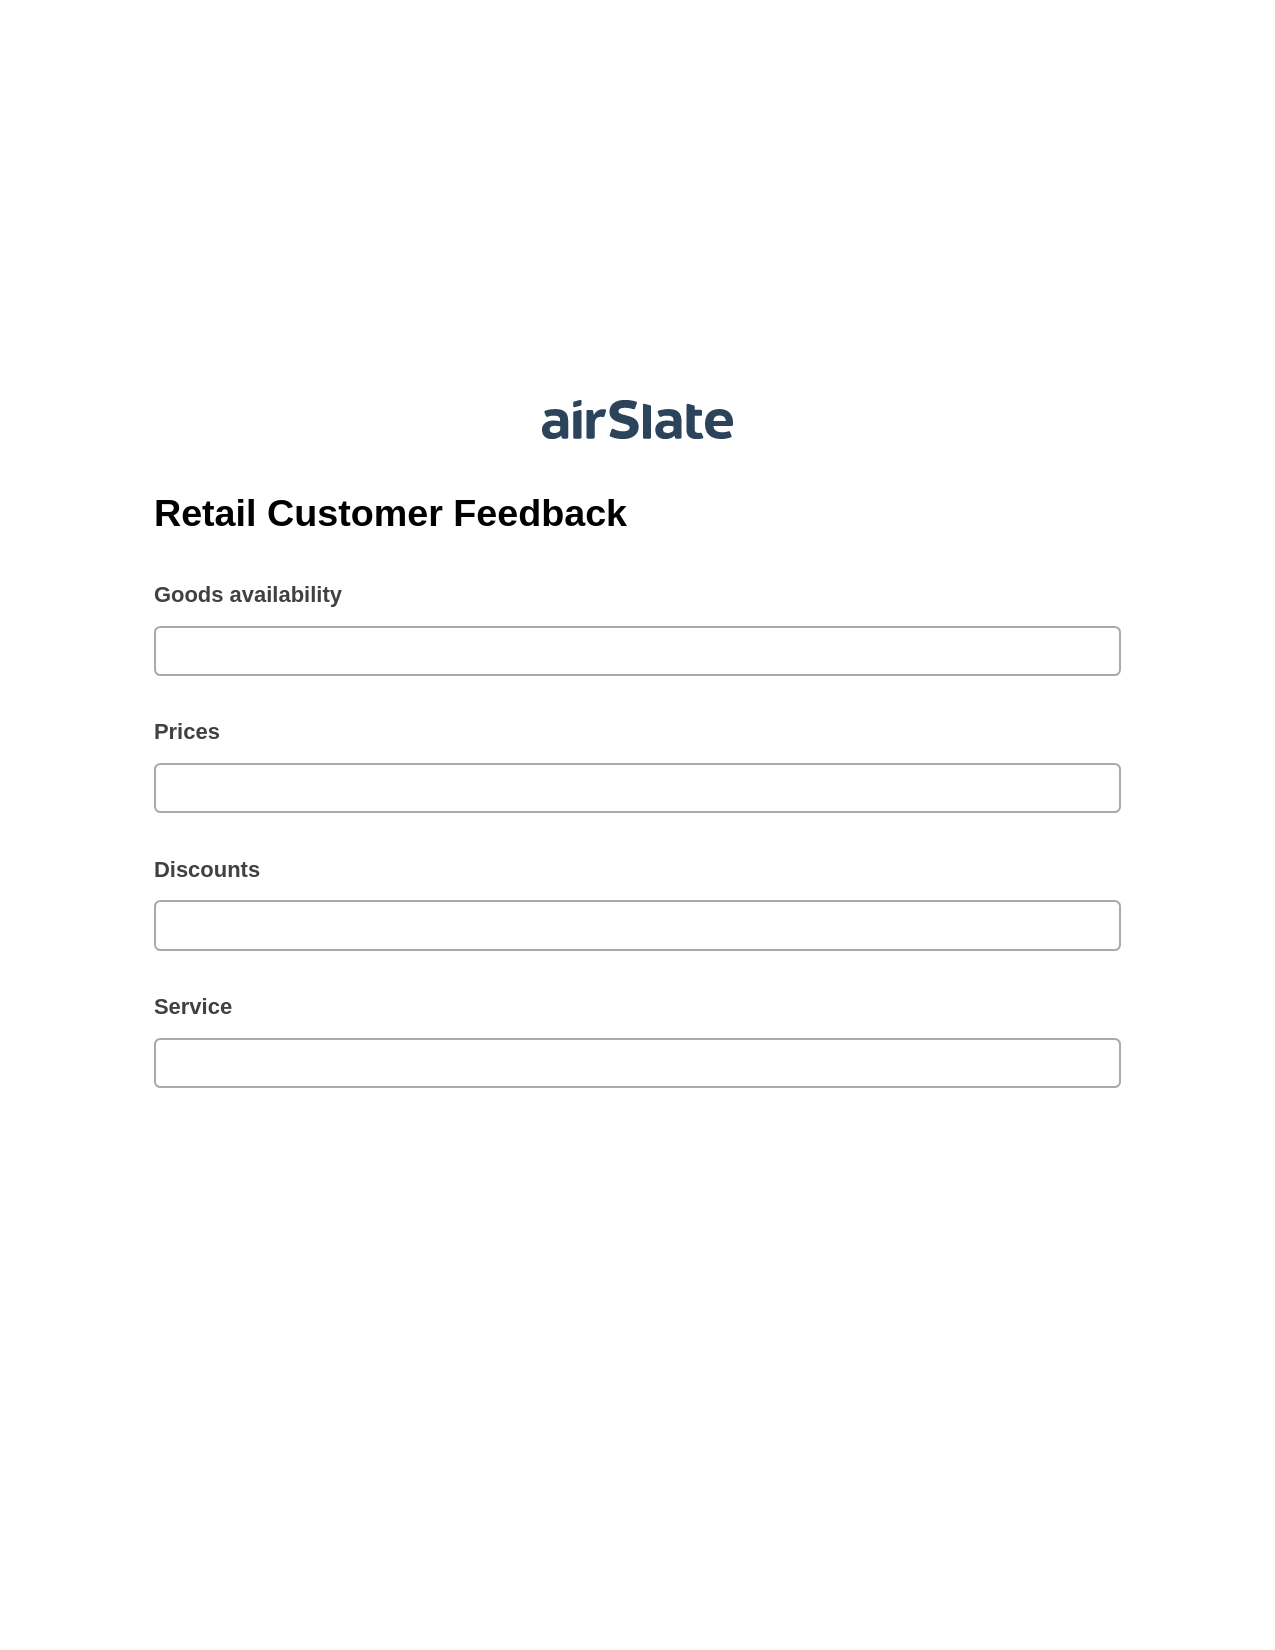 Retail Customer Feedback Pre-fill from CSV File Bot, Send a Slate with Roles Bot, Post-finish Document Bot